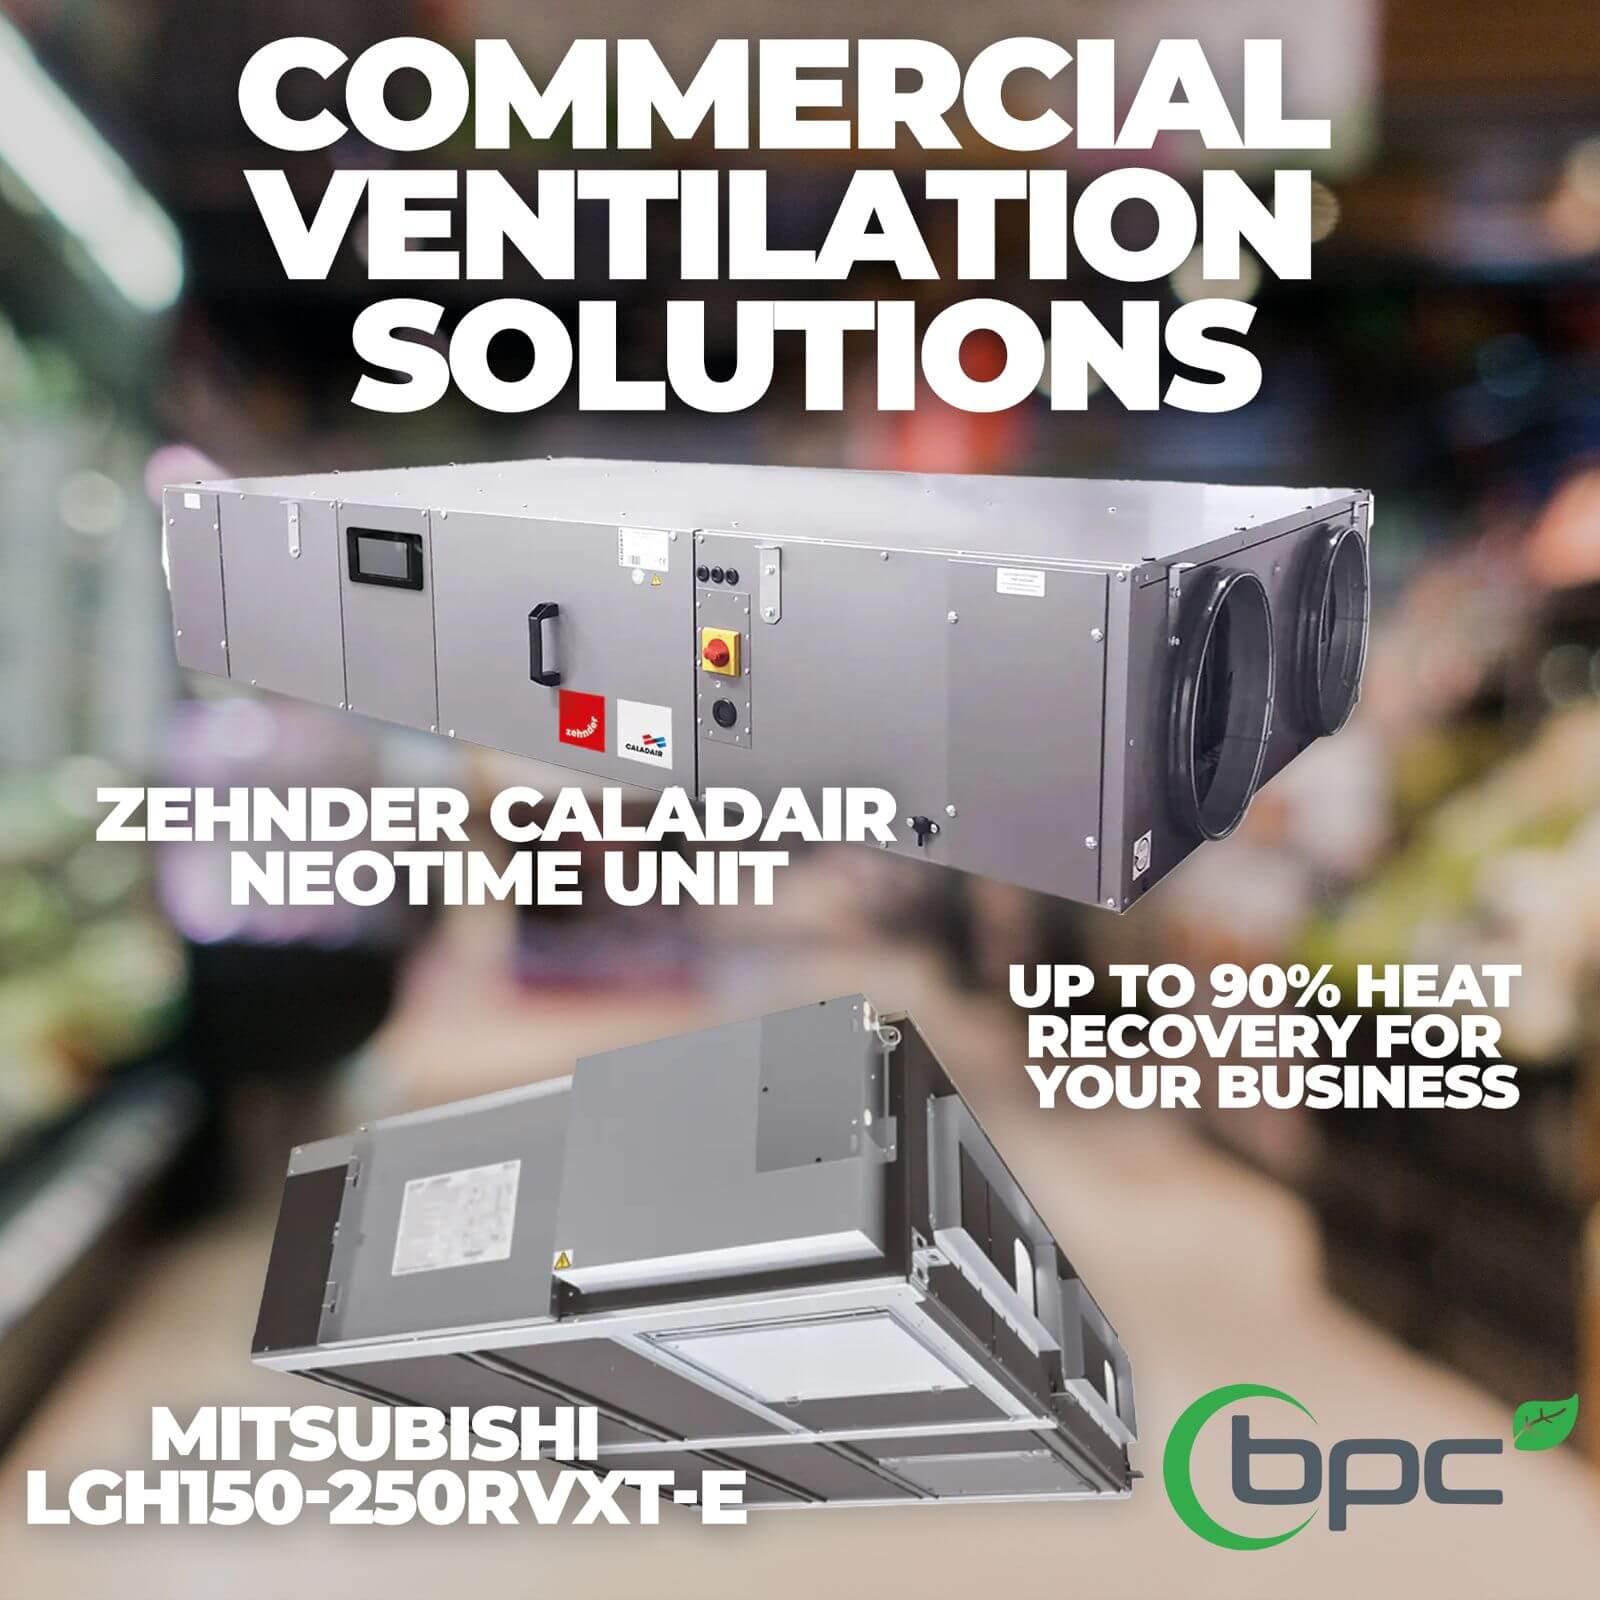 Innovative Commercial Ventilation Solutions for Your Business